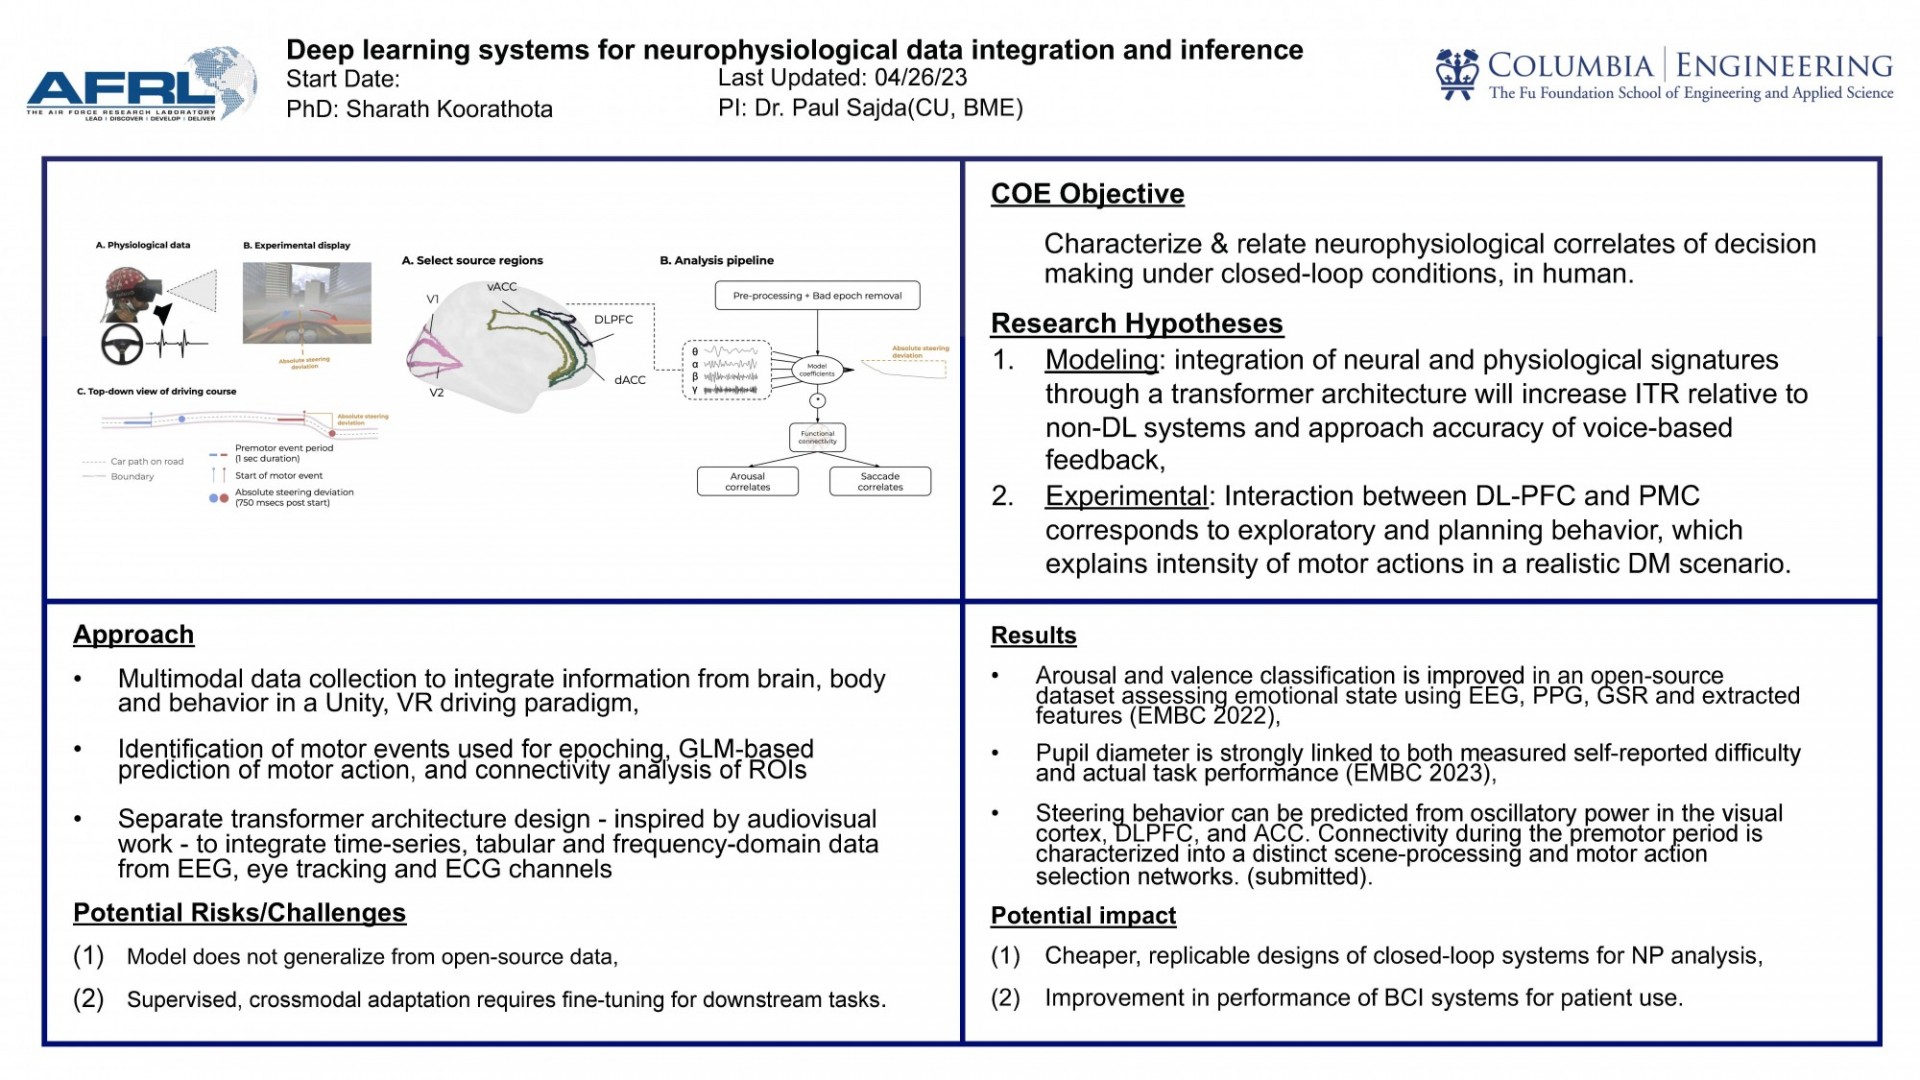 "Deep learning systems for neurophysiological data integration and inference"